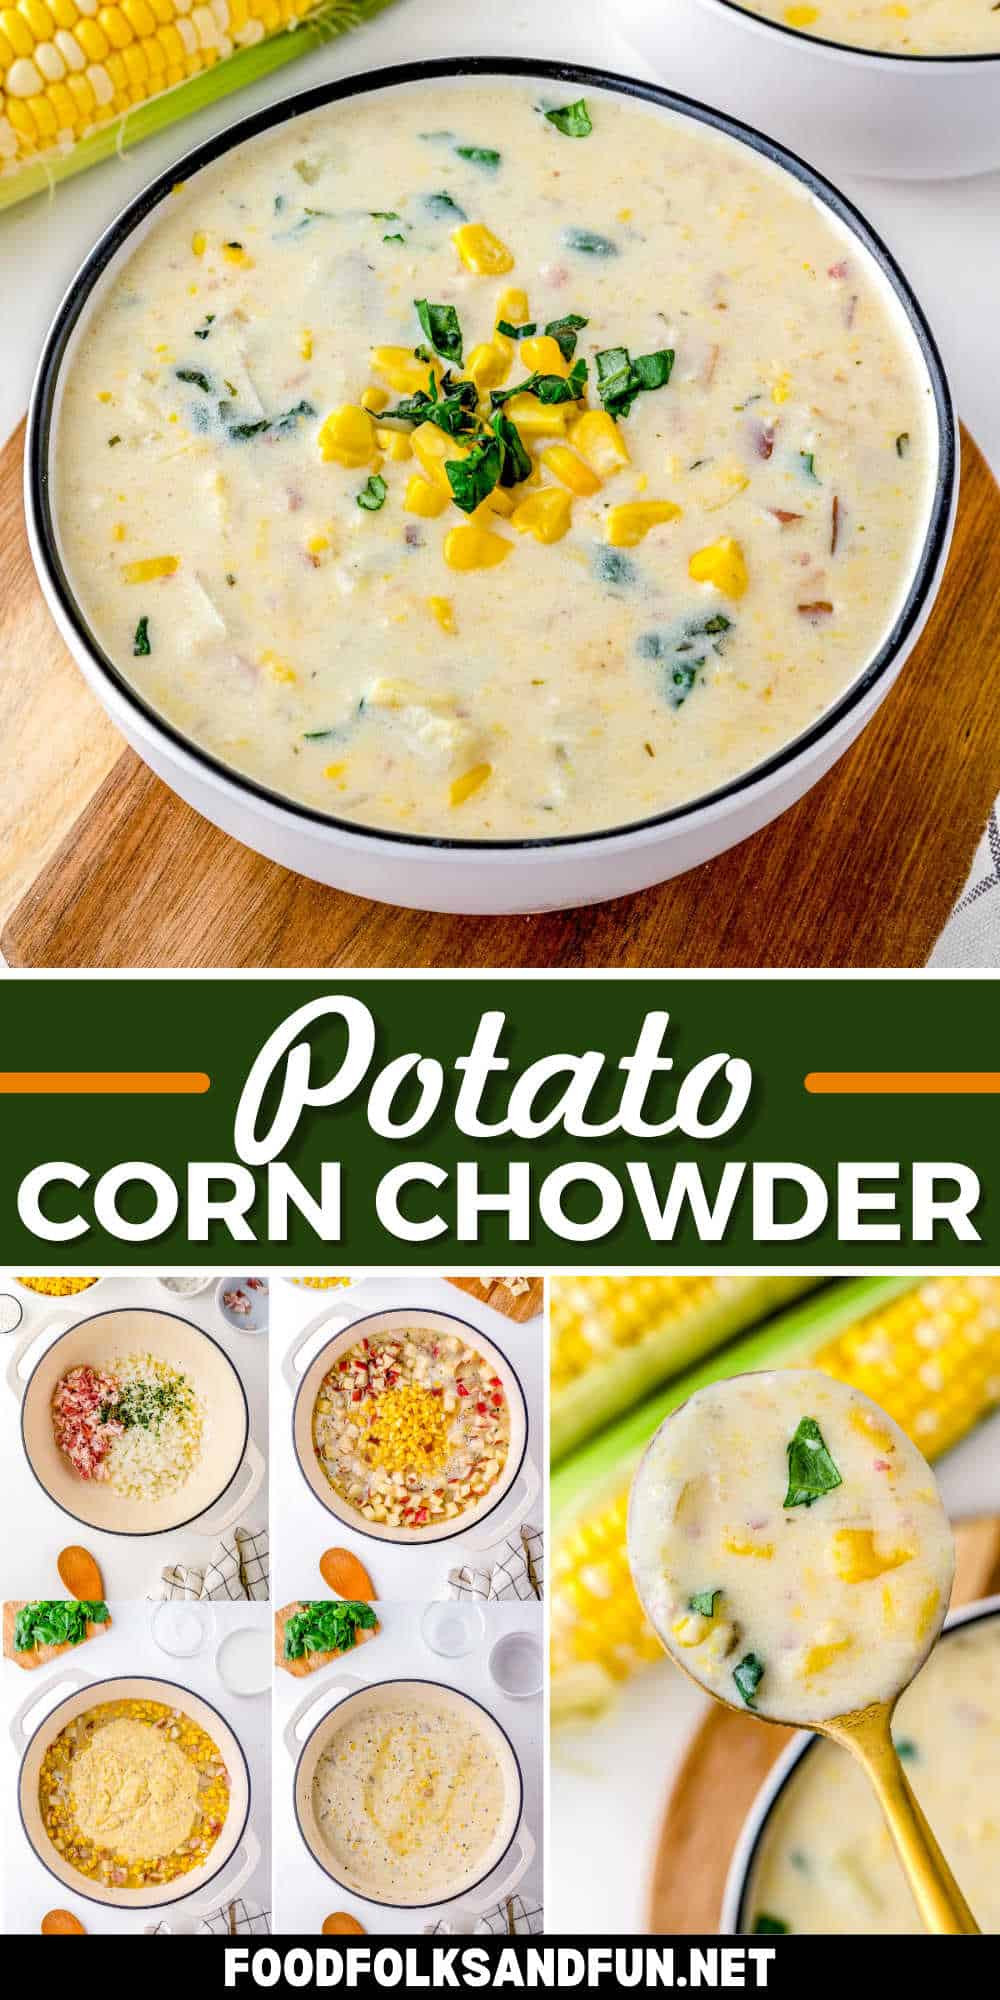 This Potato Corn Chowder recipe is bursting with corn flavor. It’s creamy without being heavy and absolutely perfect for soup season! via @foodfolksandfun